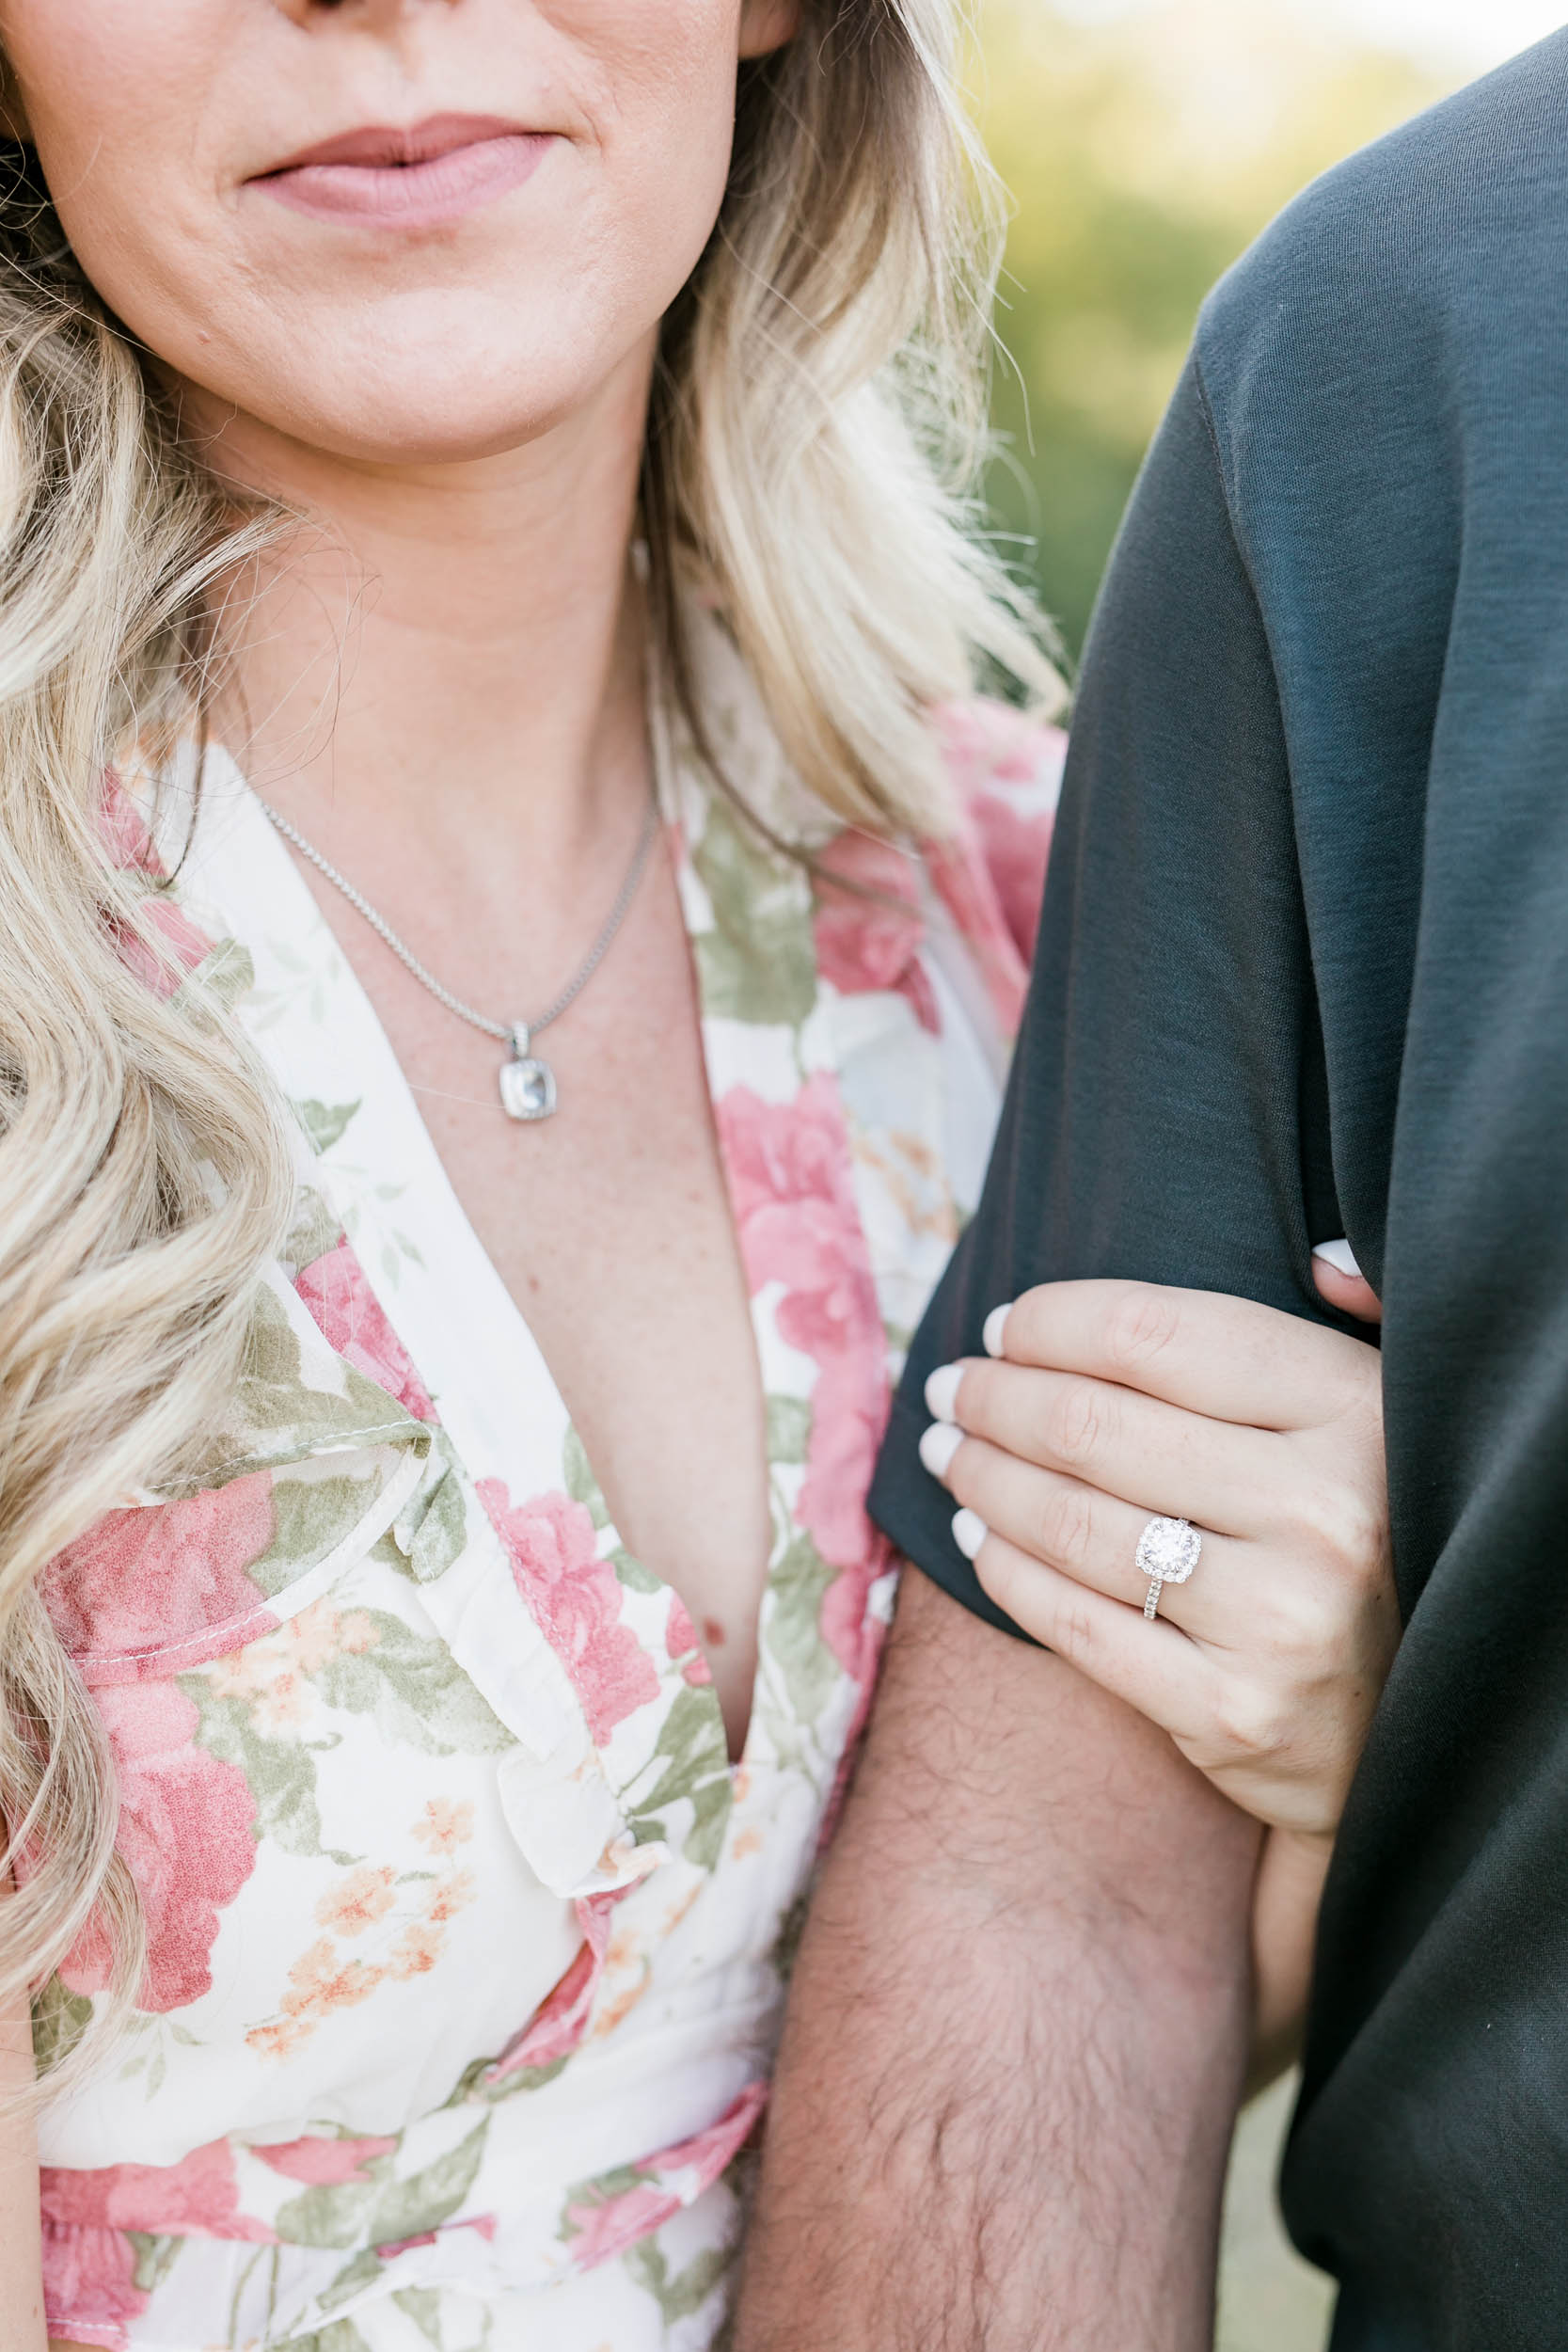 Couple posing with engagement ring on woman's hand